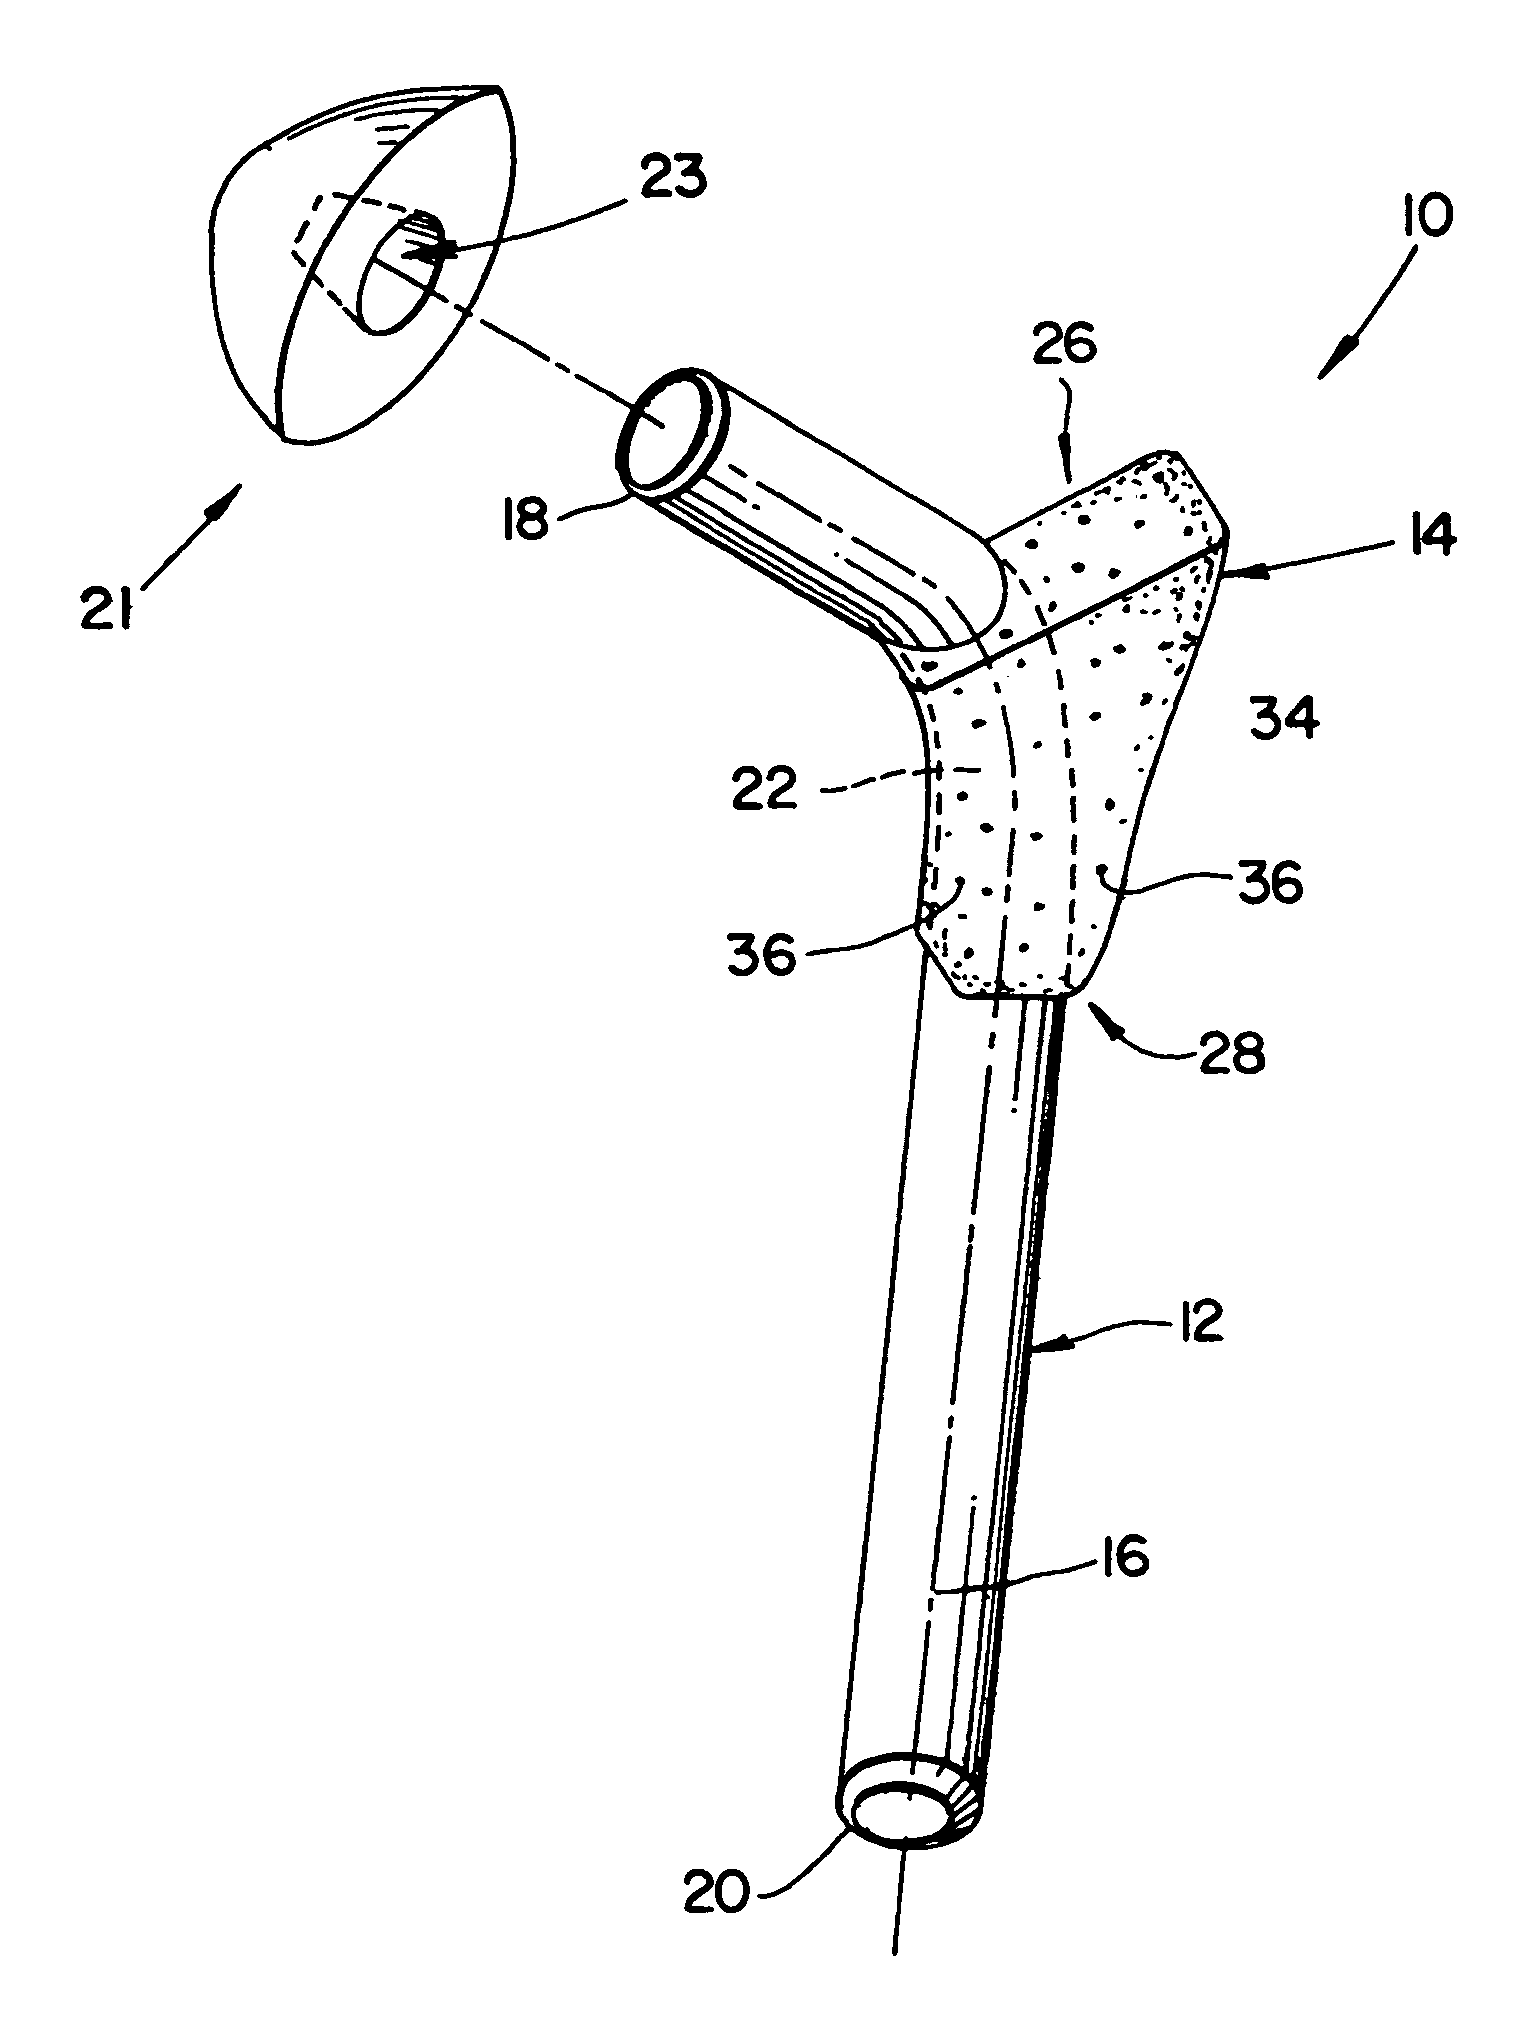 Implantable orthopedic prosthesis with textured polymeric surfaces